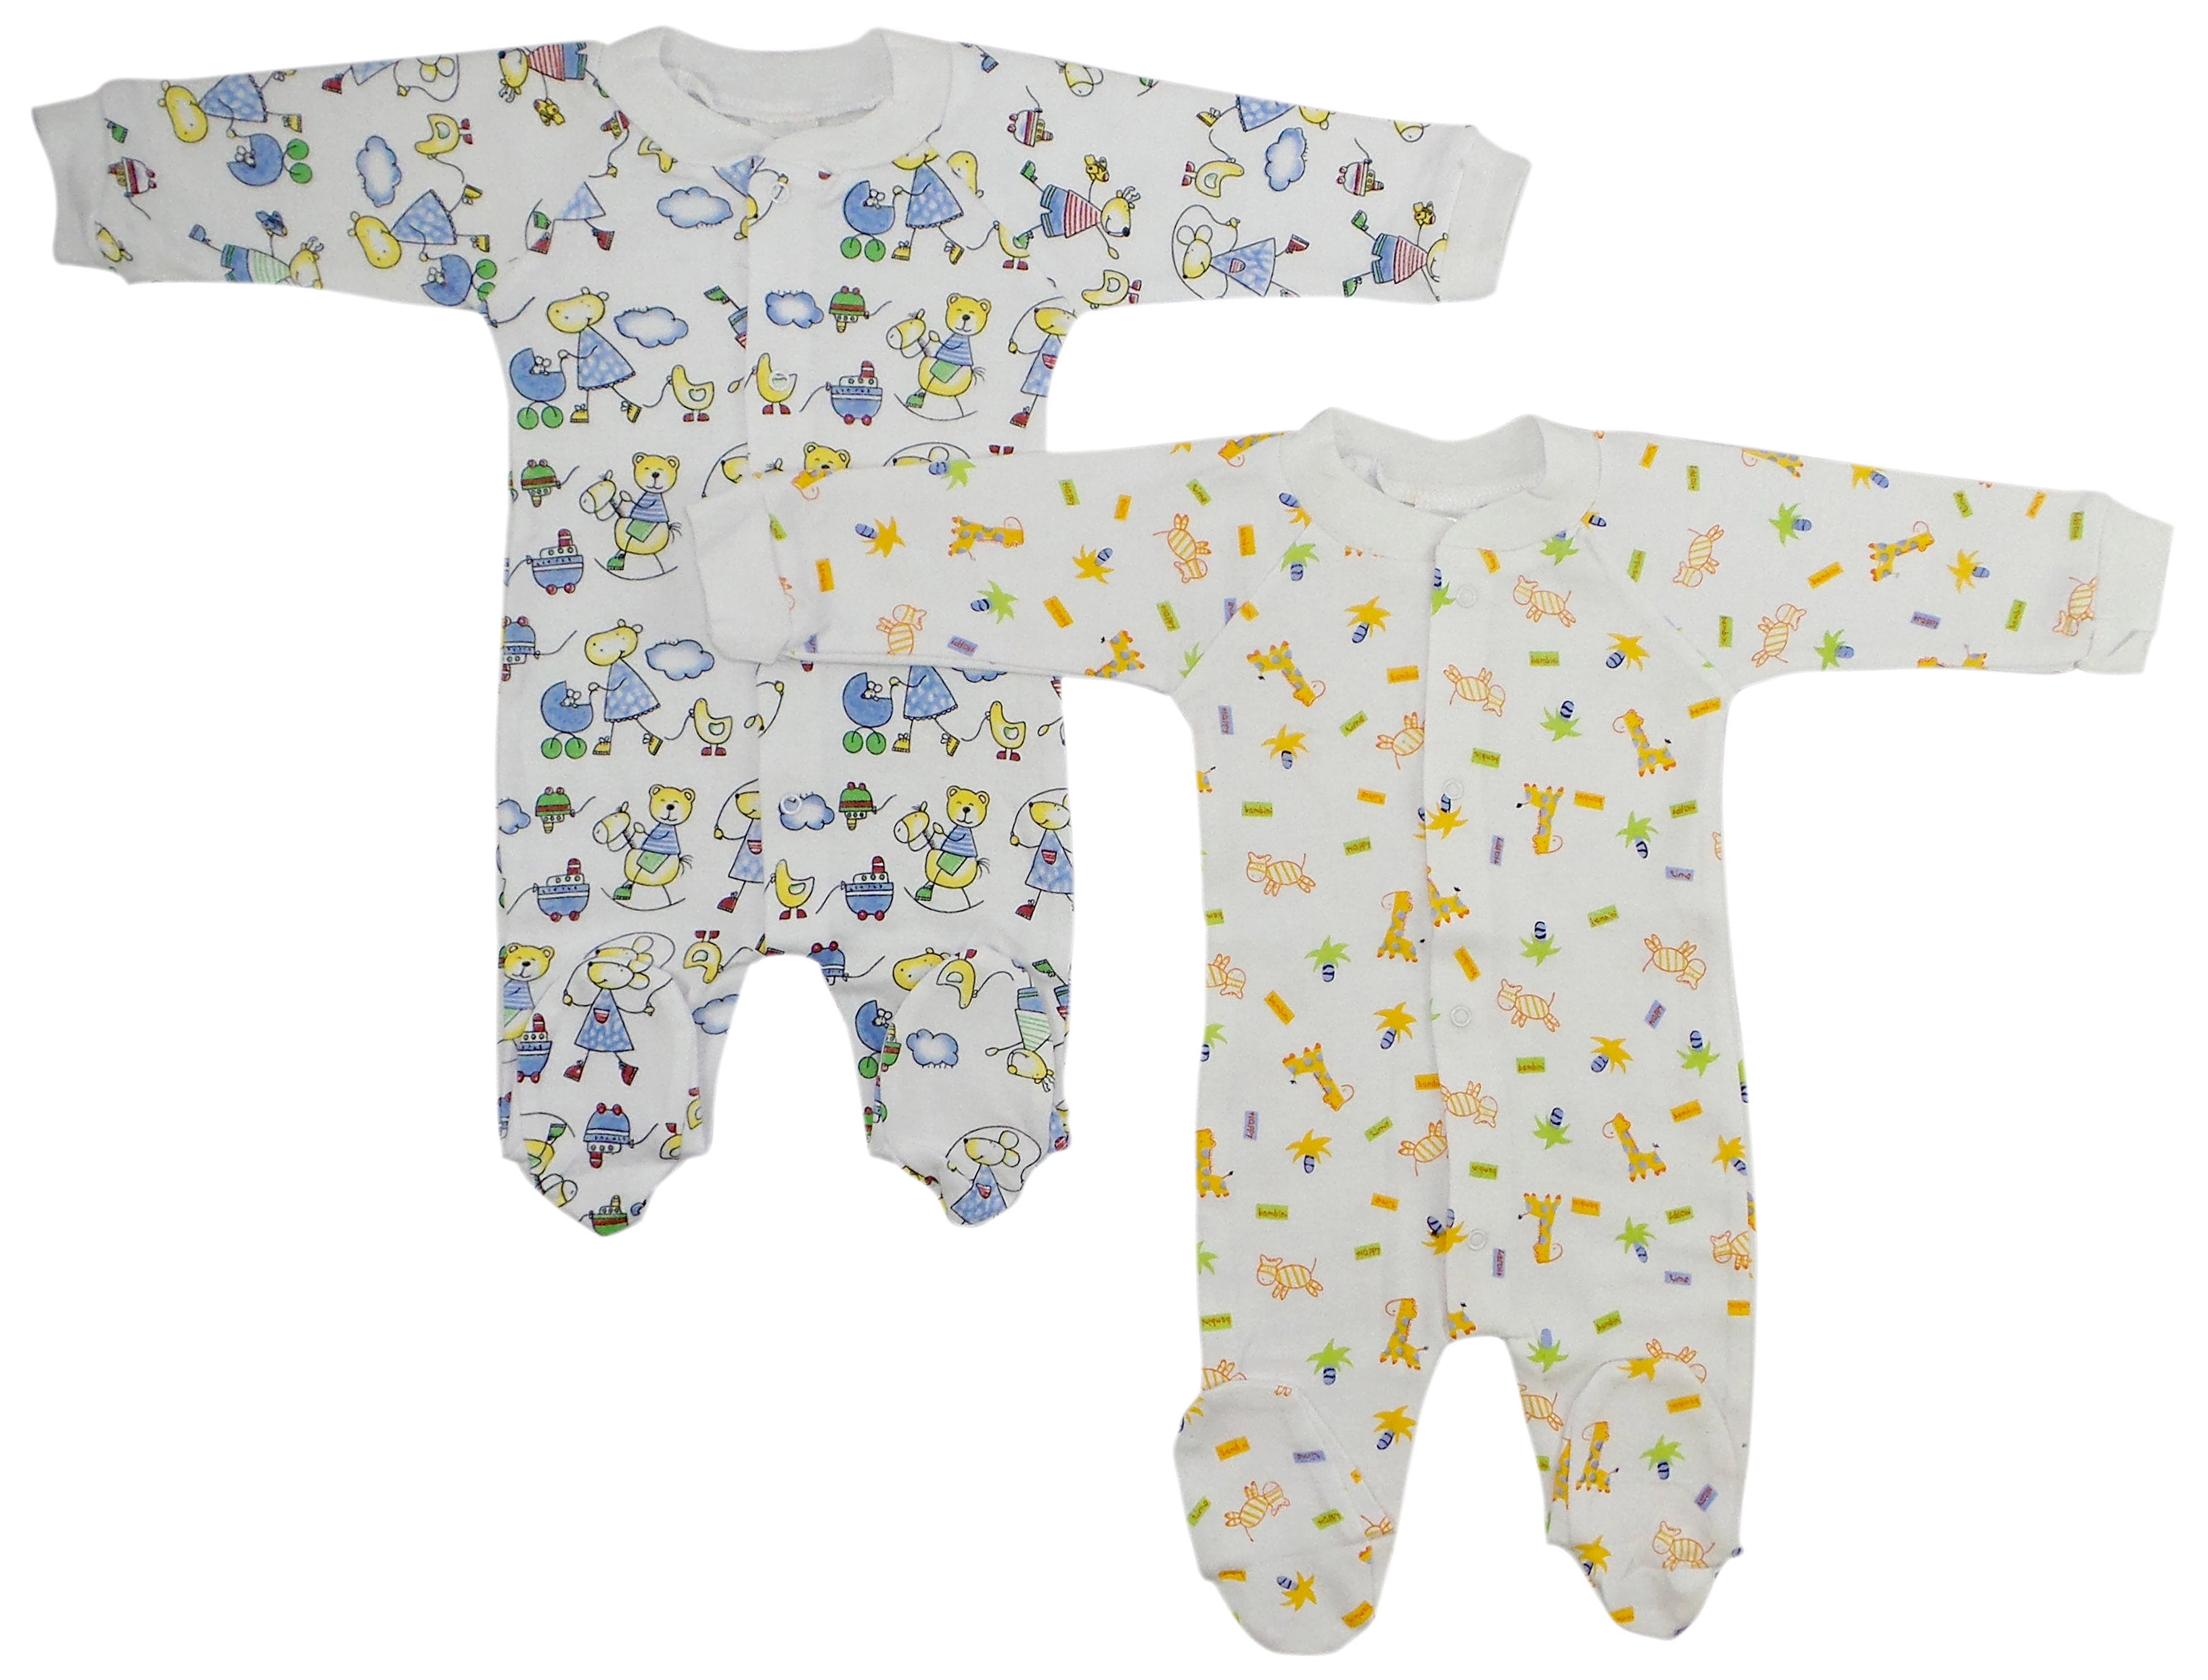 515cl1c1 Sleep & Play, White With Printed - Large